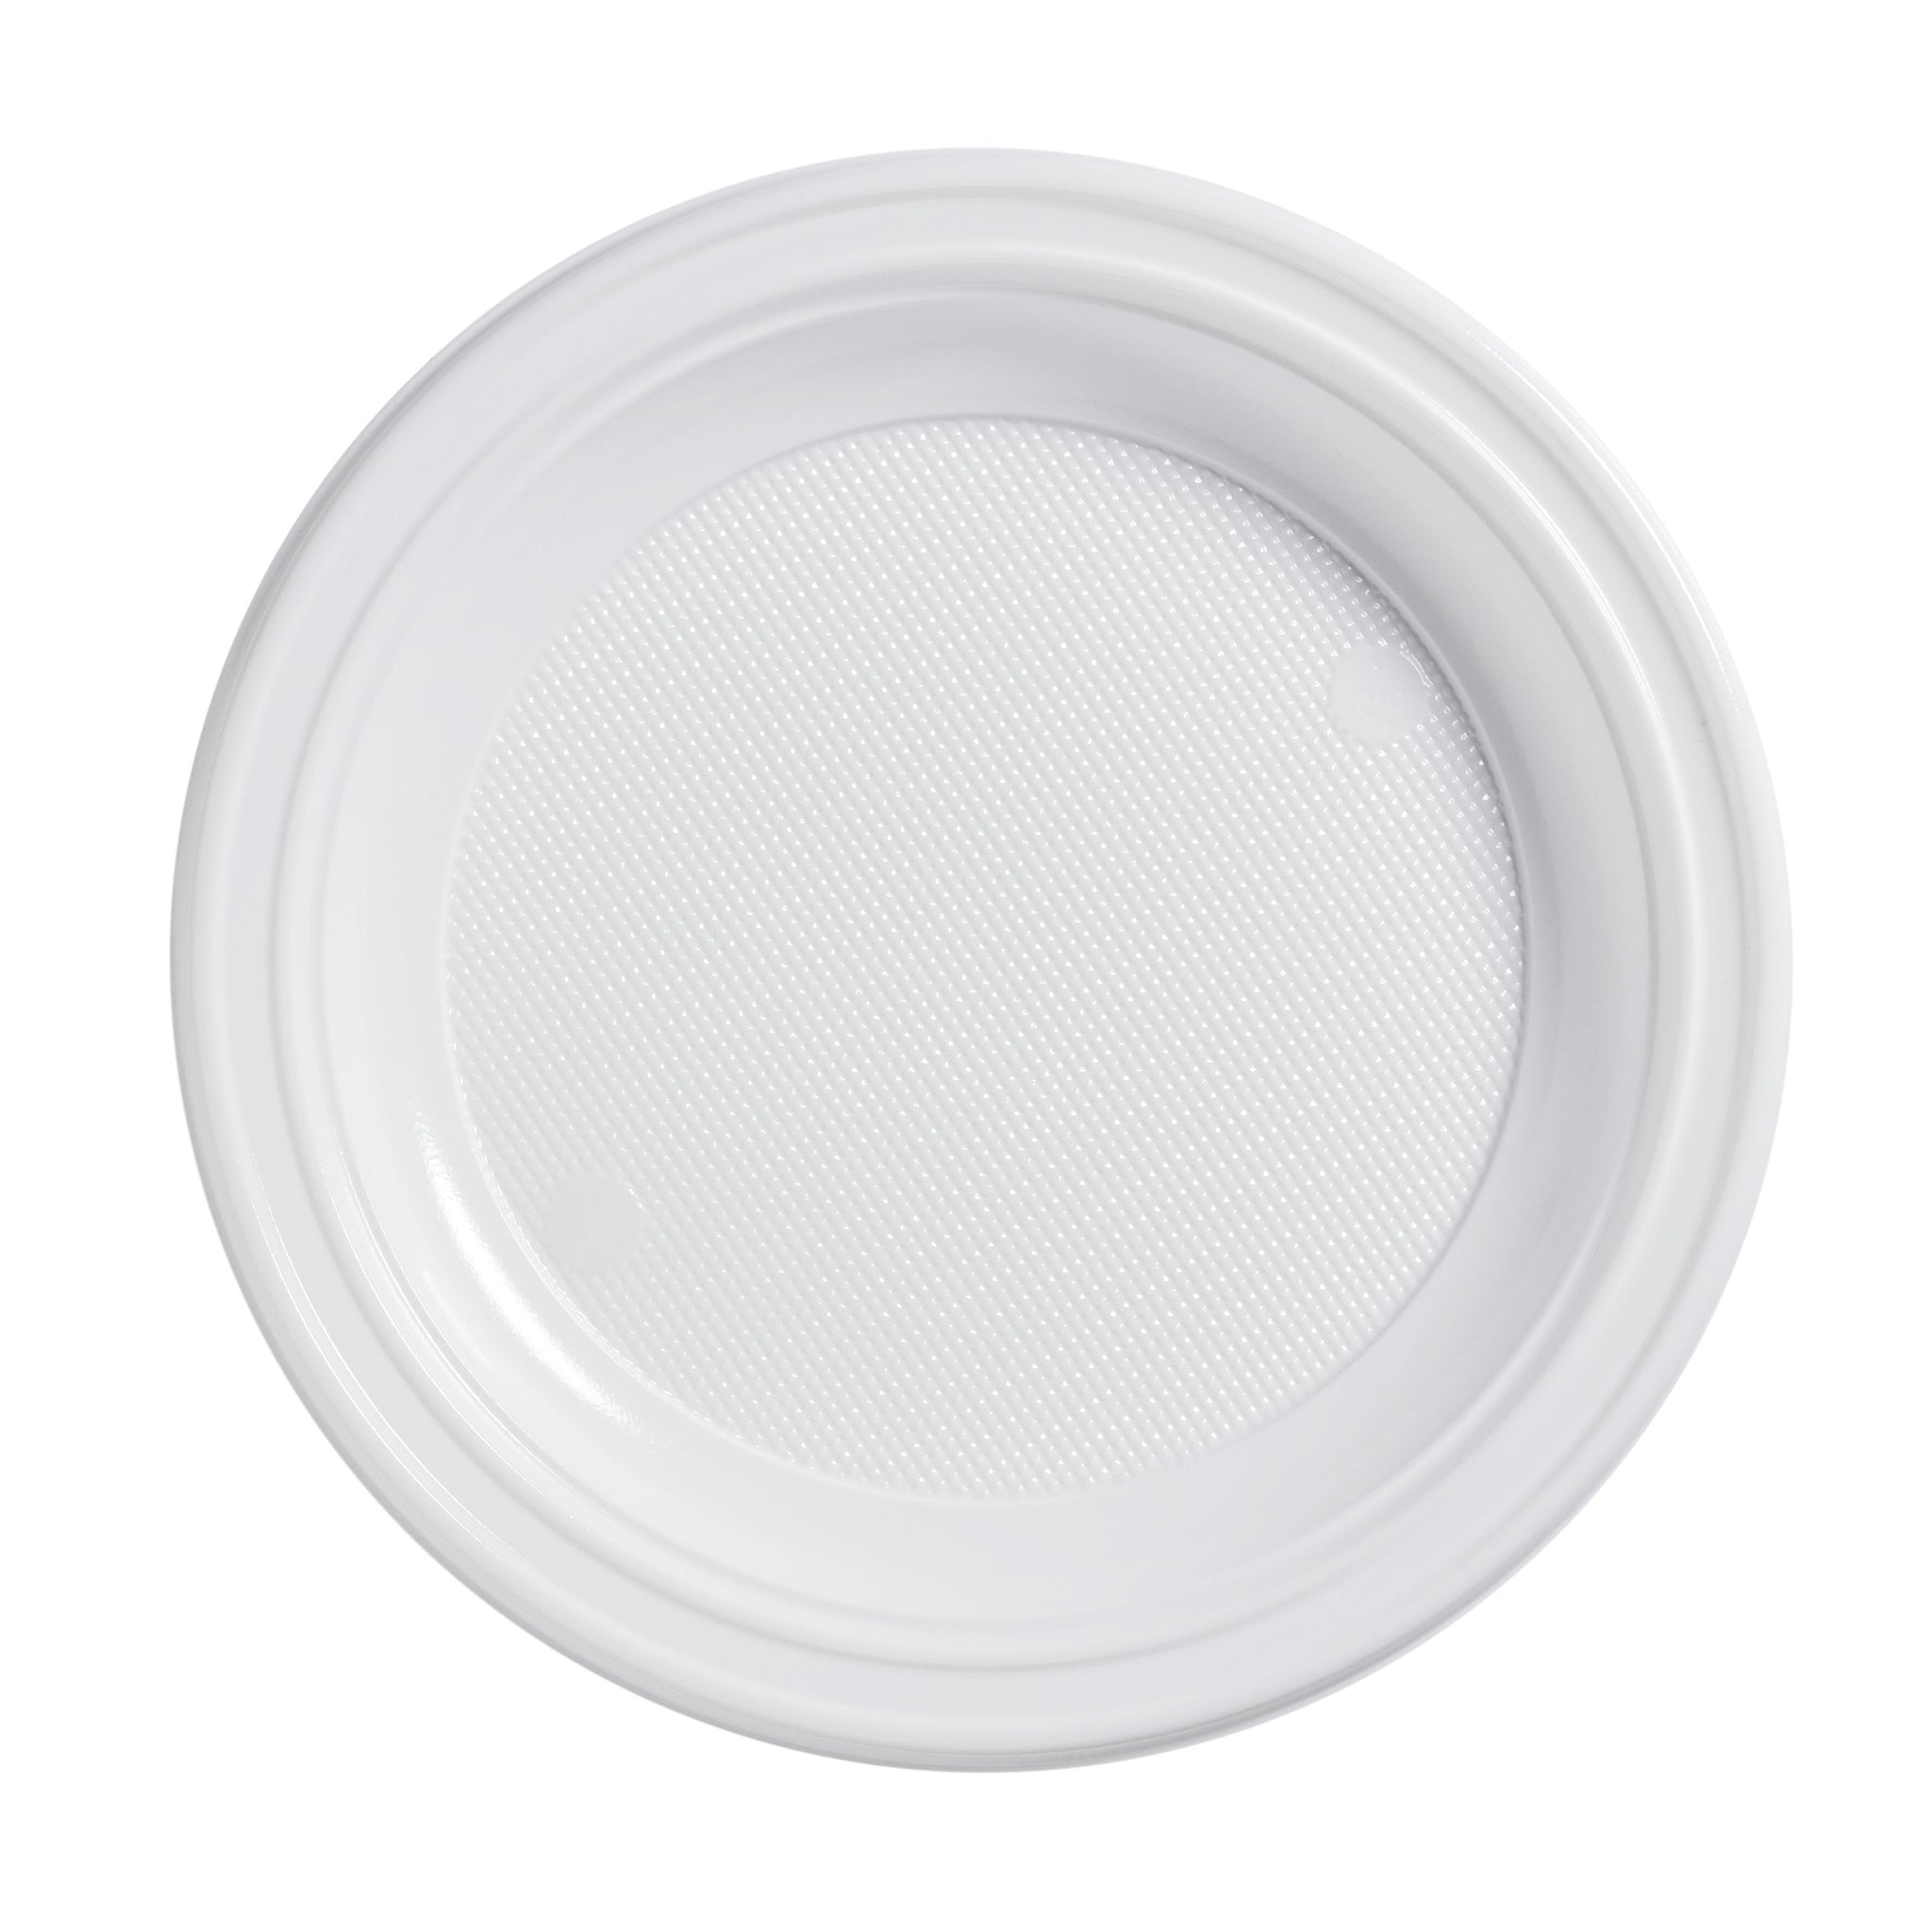 aba>Hefty Plastic Plates (9in), 25 pack